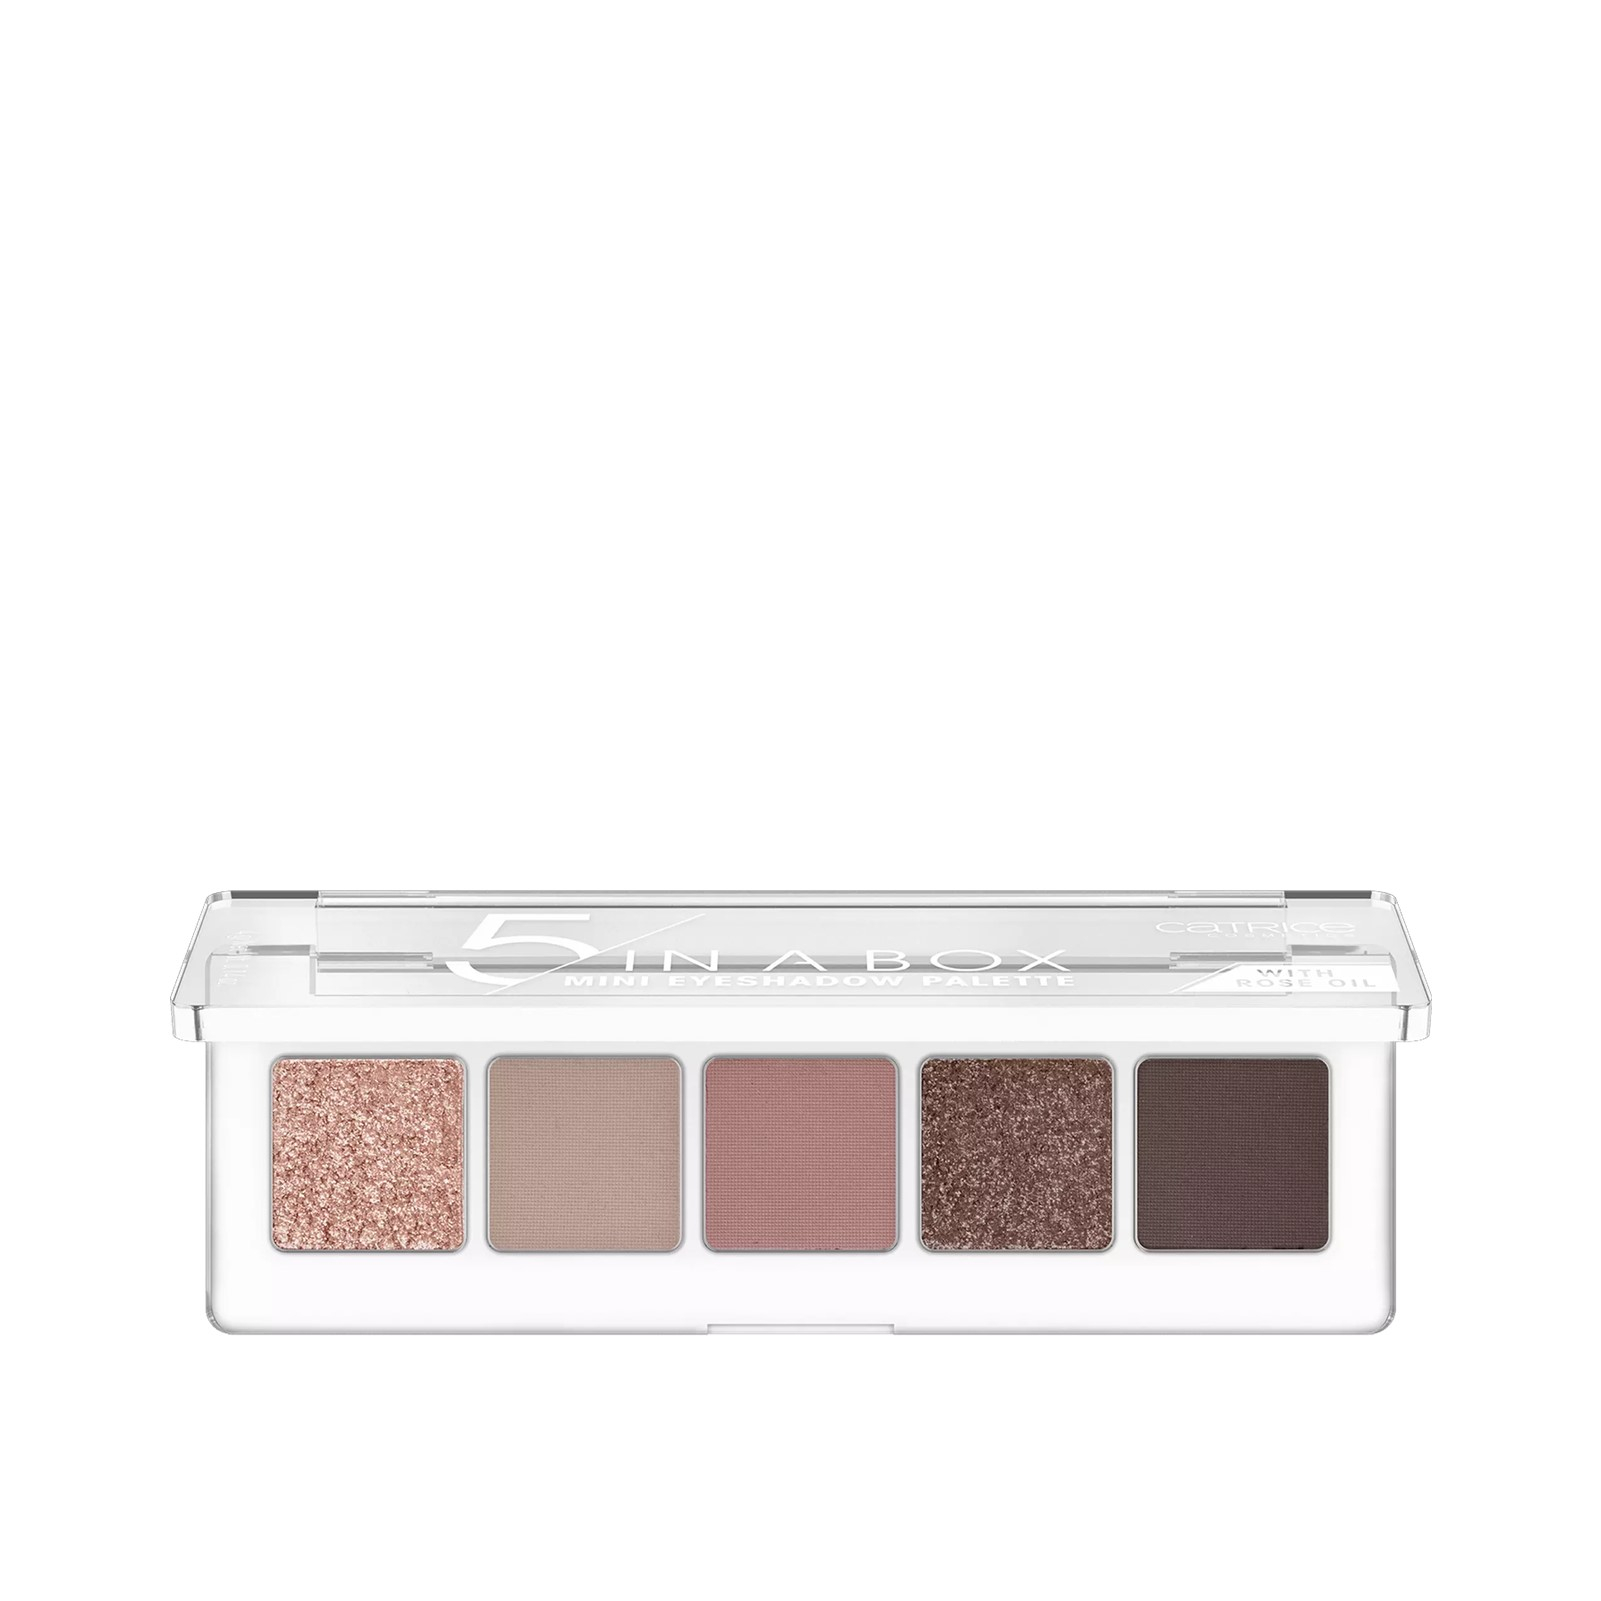 Buy Catrice 5 In A Box Mini Eyeshadow Palette 020 Soft Rose Look · USA